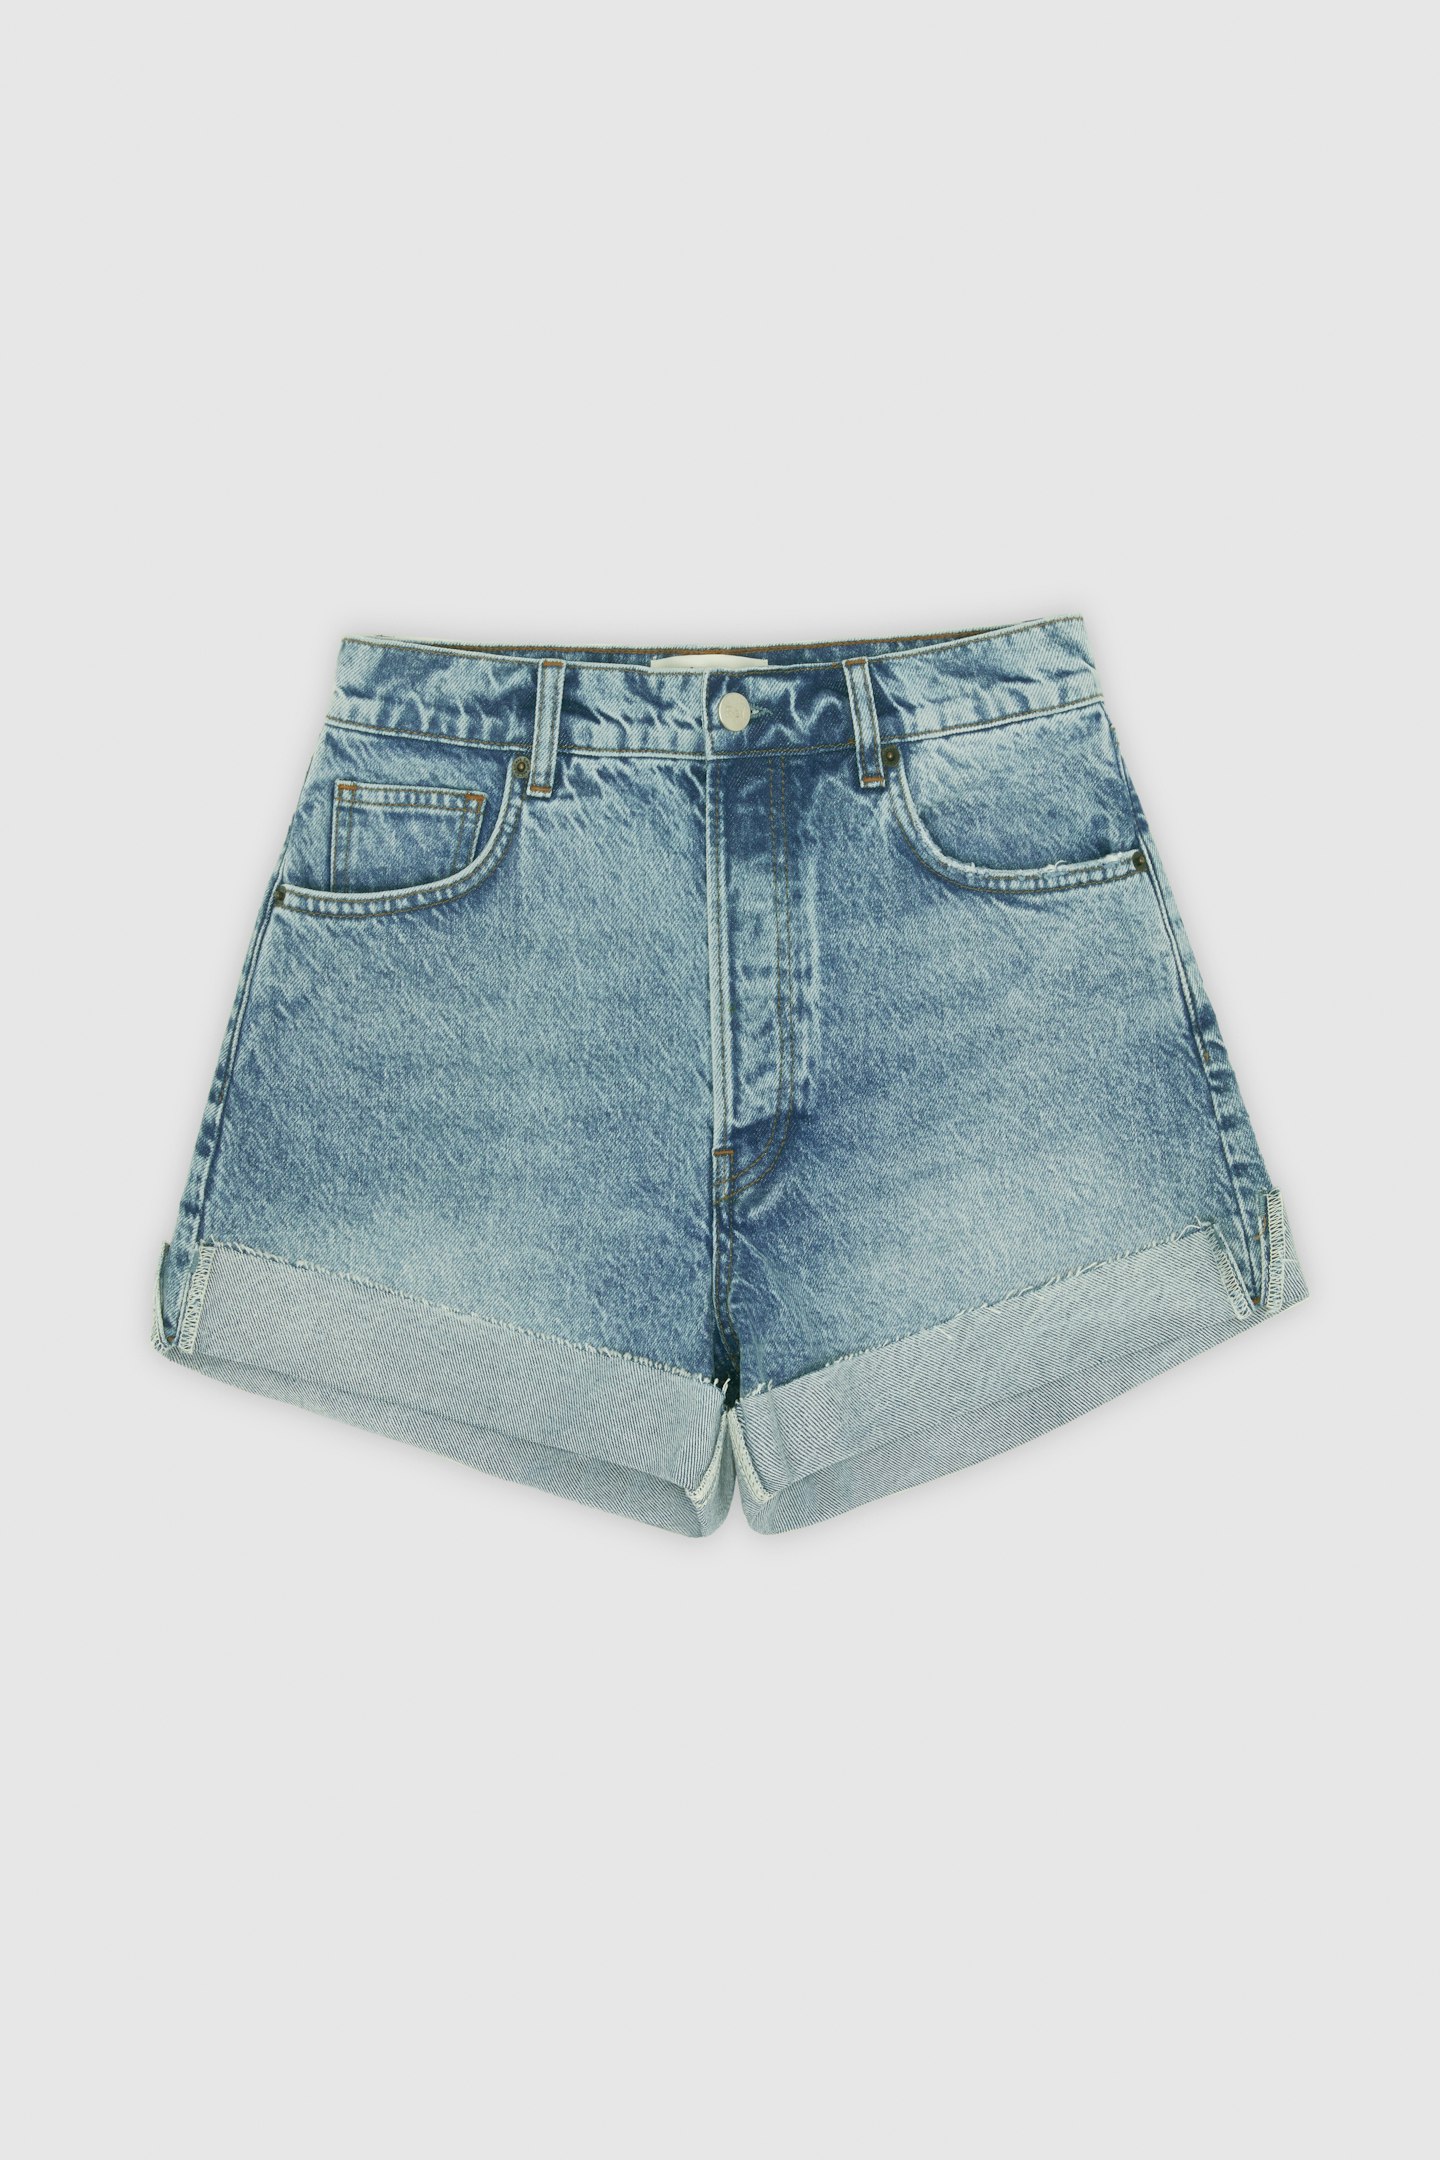 Reformation, Charlie Cuffed High-Rise Jean Shorts, £84